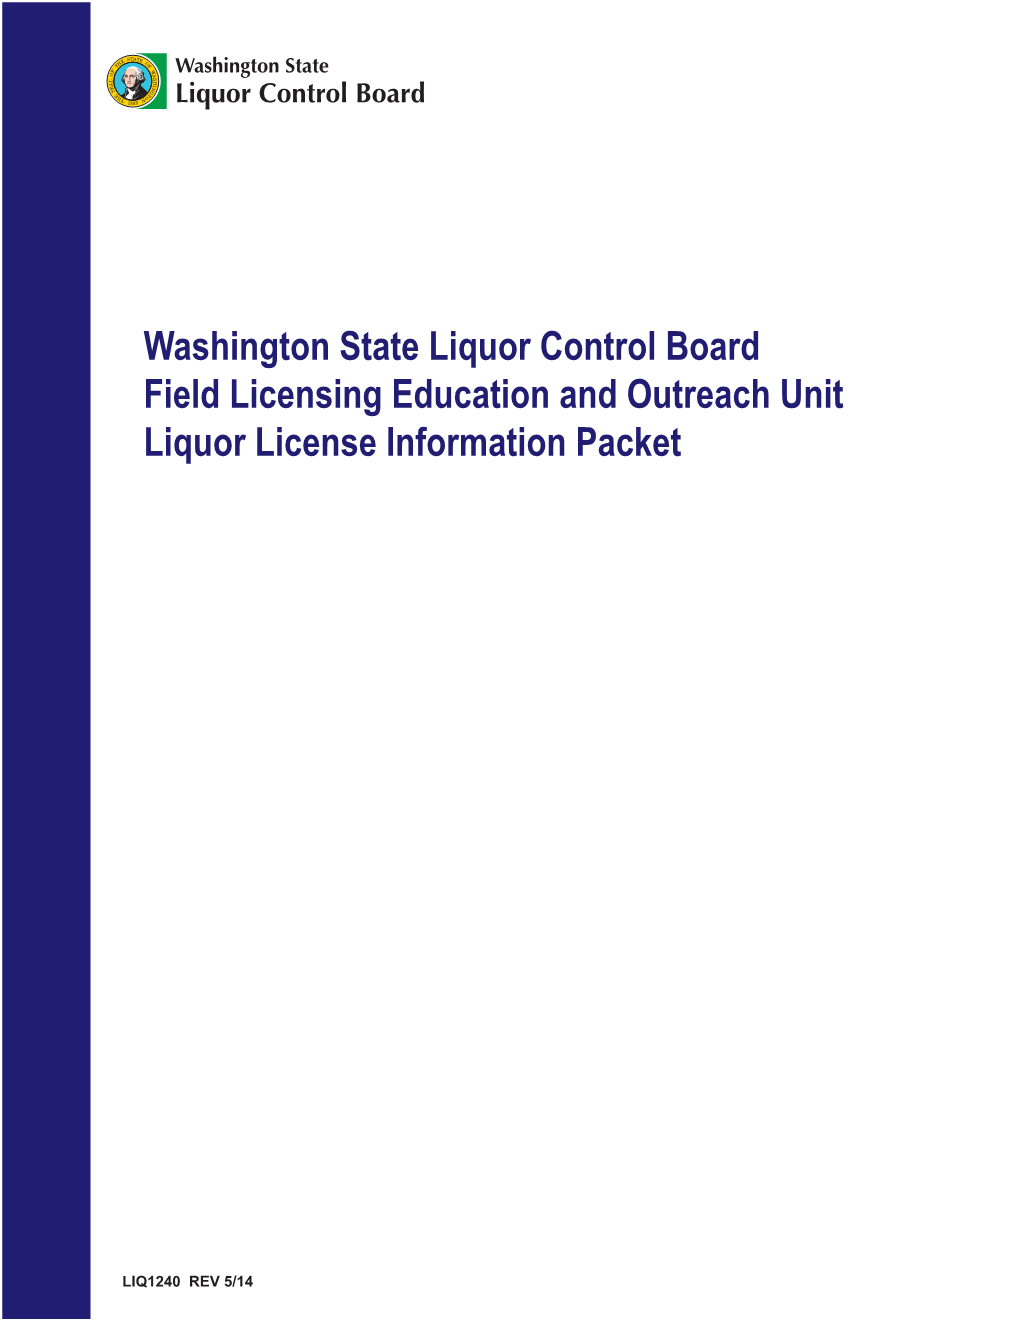 Washington State Liquor Control Board Field Licensing Education and Outreach Unit Liquor License Information Packet